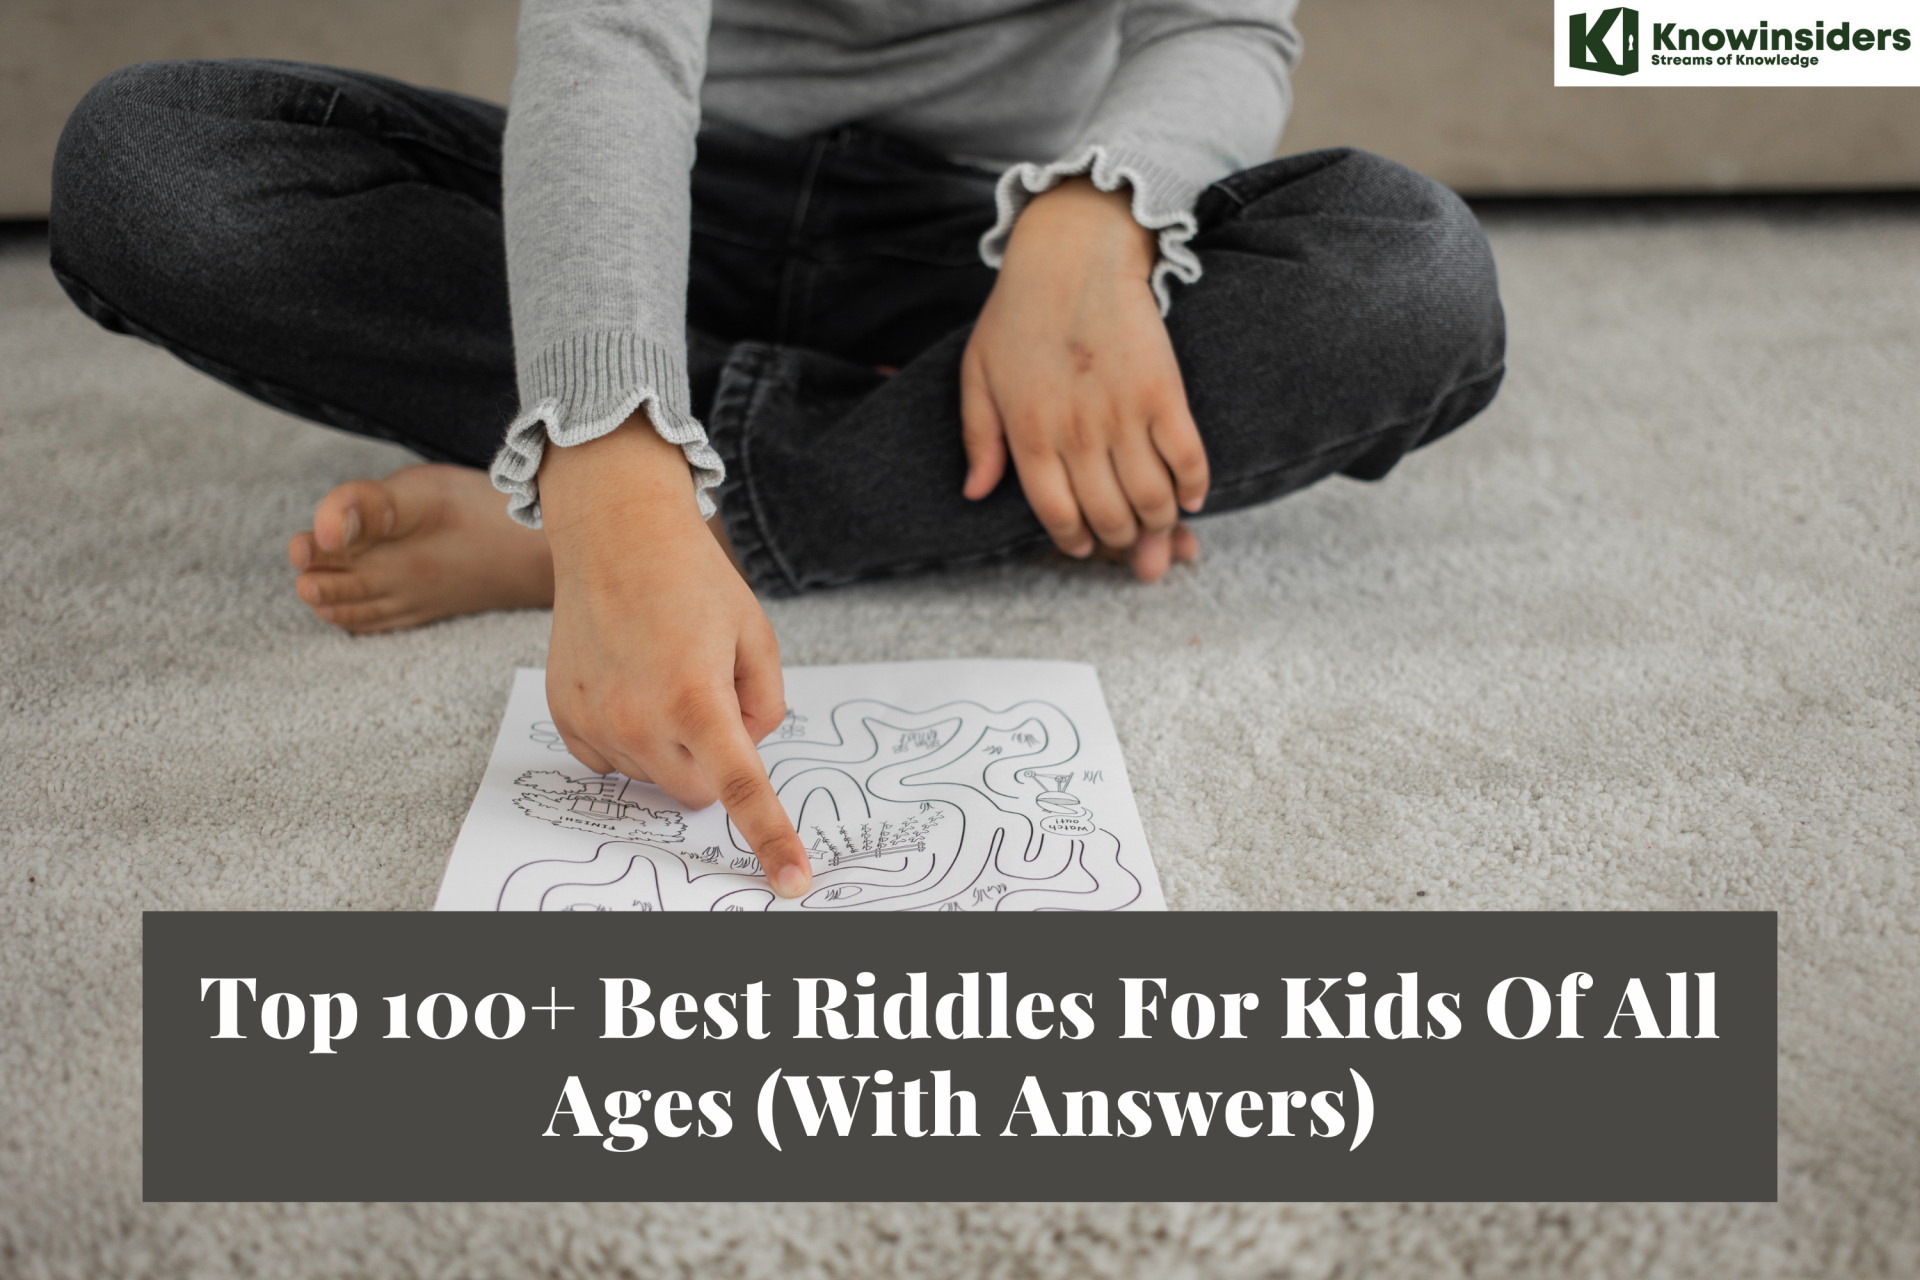 Top 100+ Best Riddles For Kids Of All Ages (With Answers)